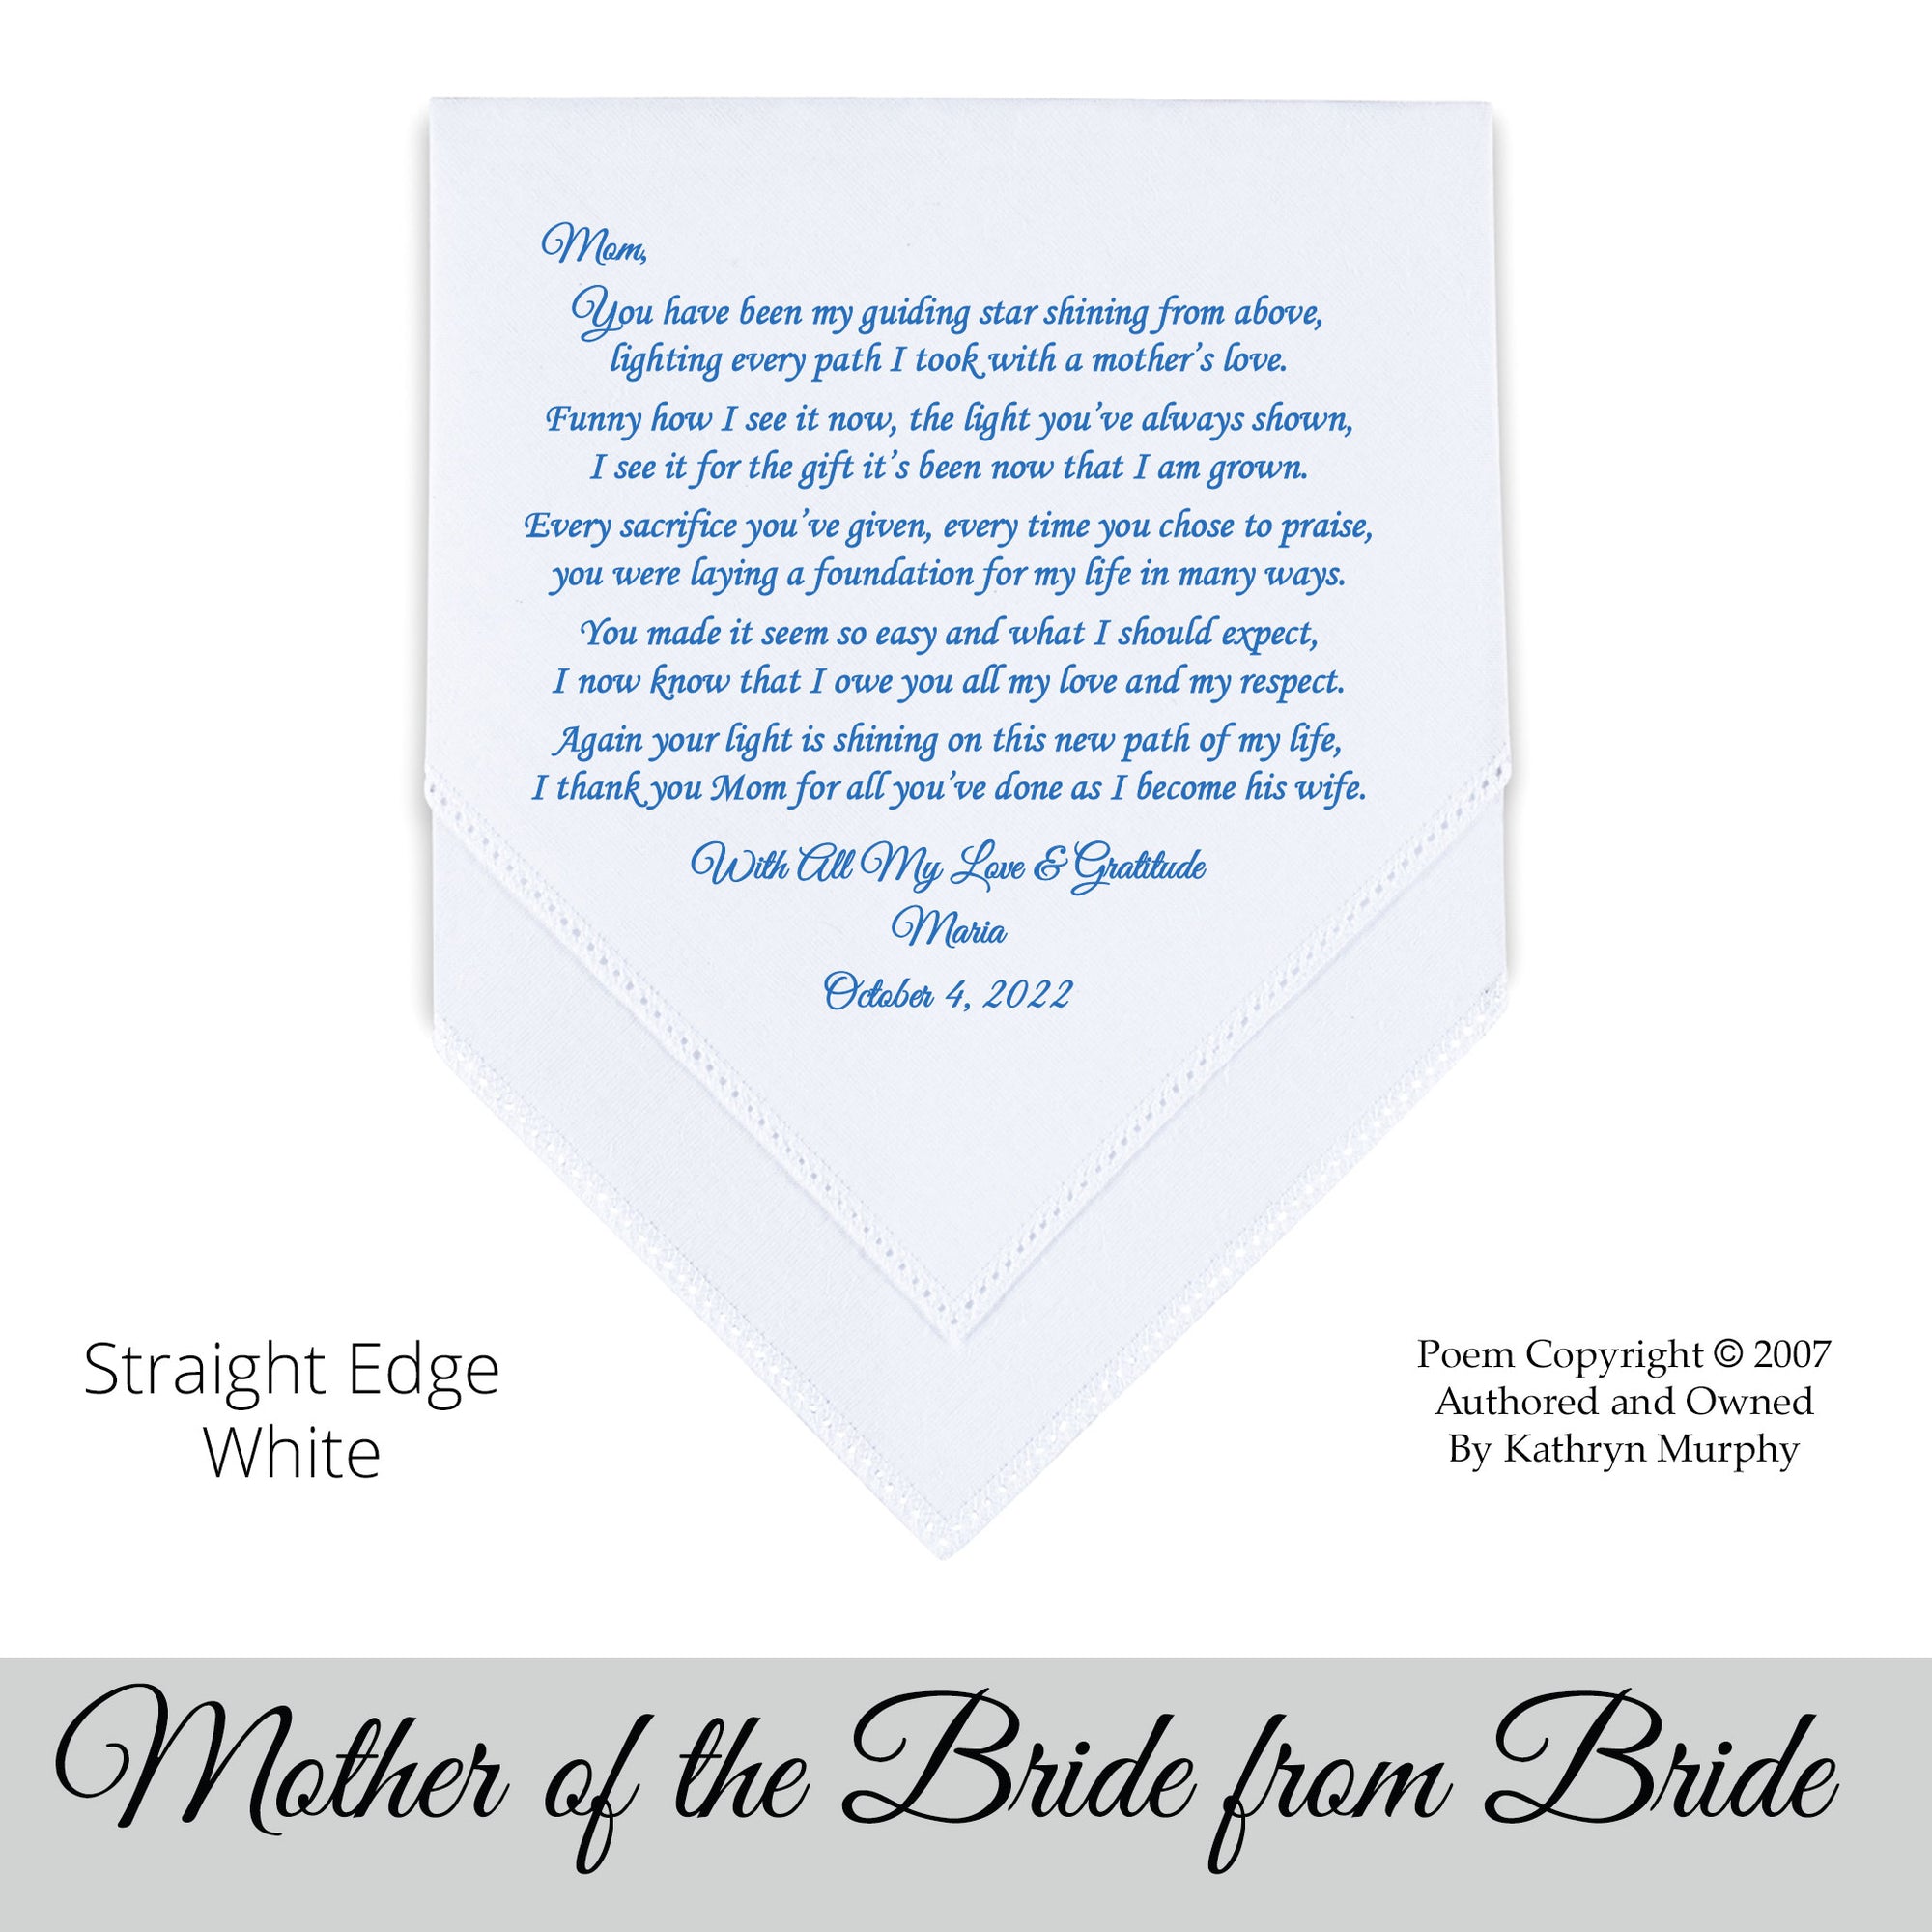 gift for the mother of the bride. Wedding Hankie with printed poem from the bride 